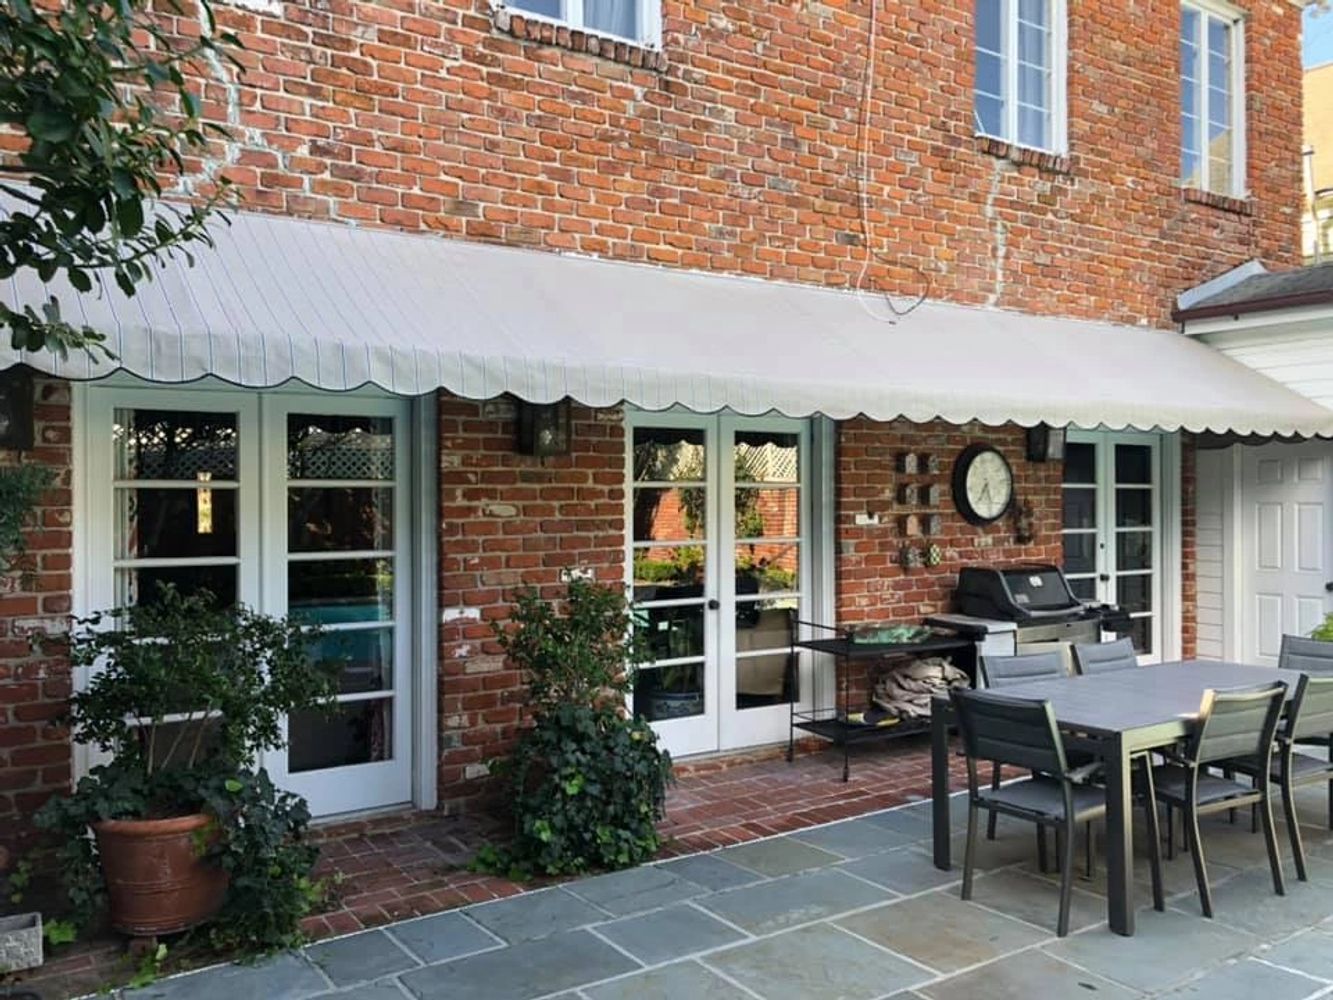 J B Awnings - Awnings and Canopies, Canopy, Retractable Awning